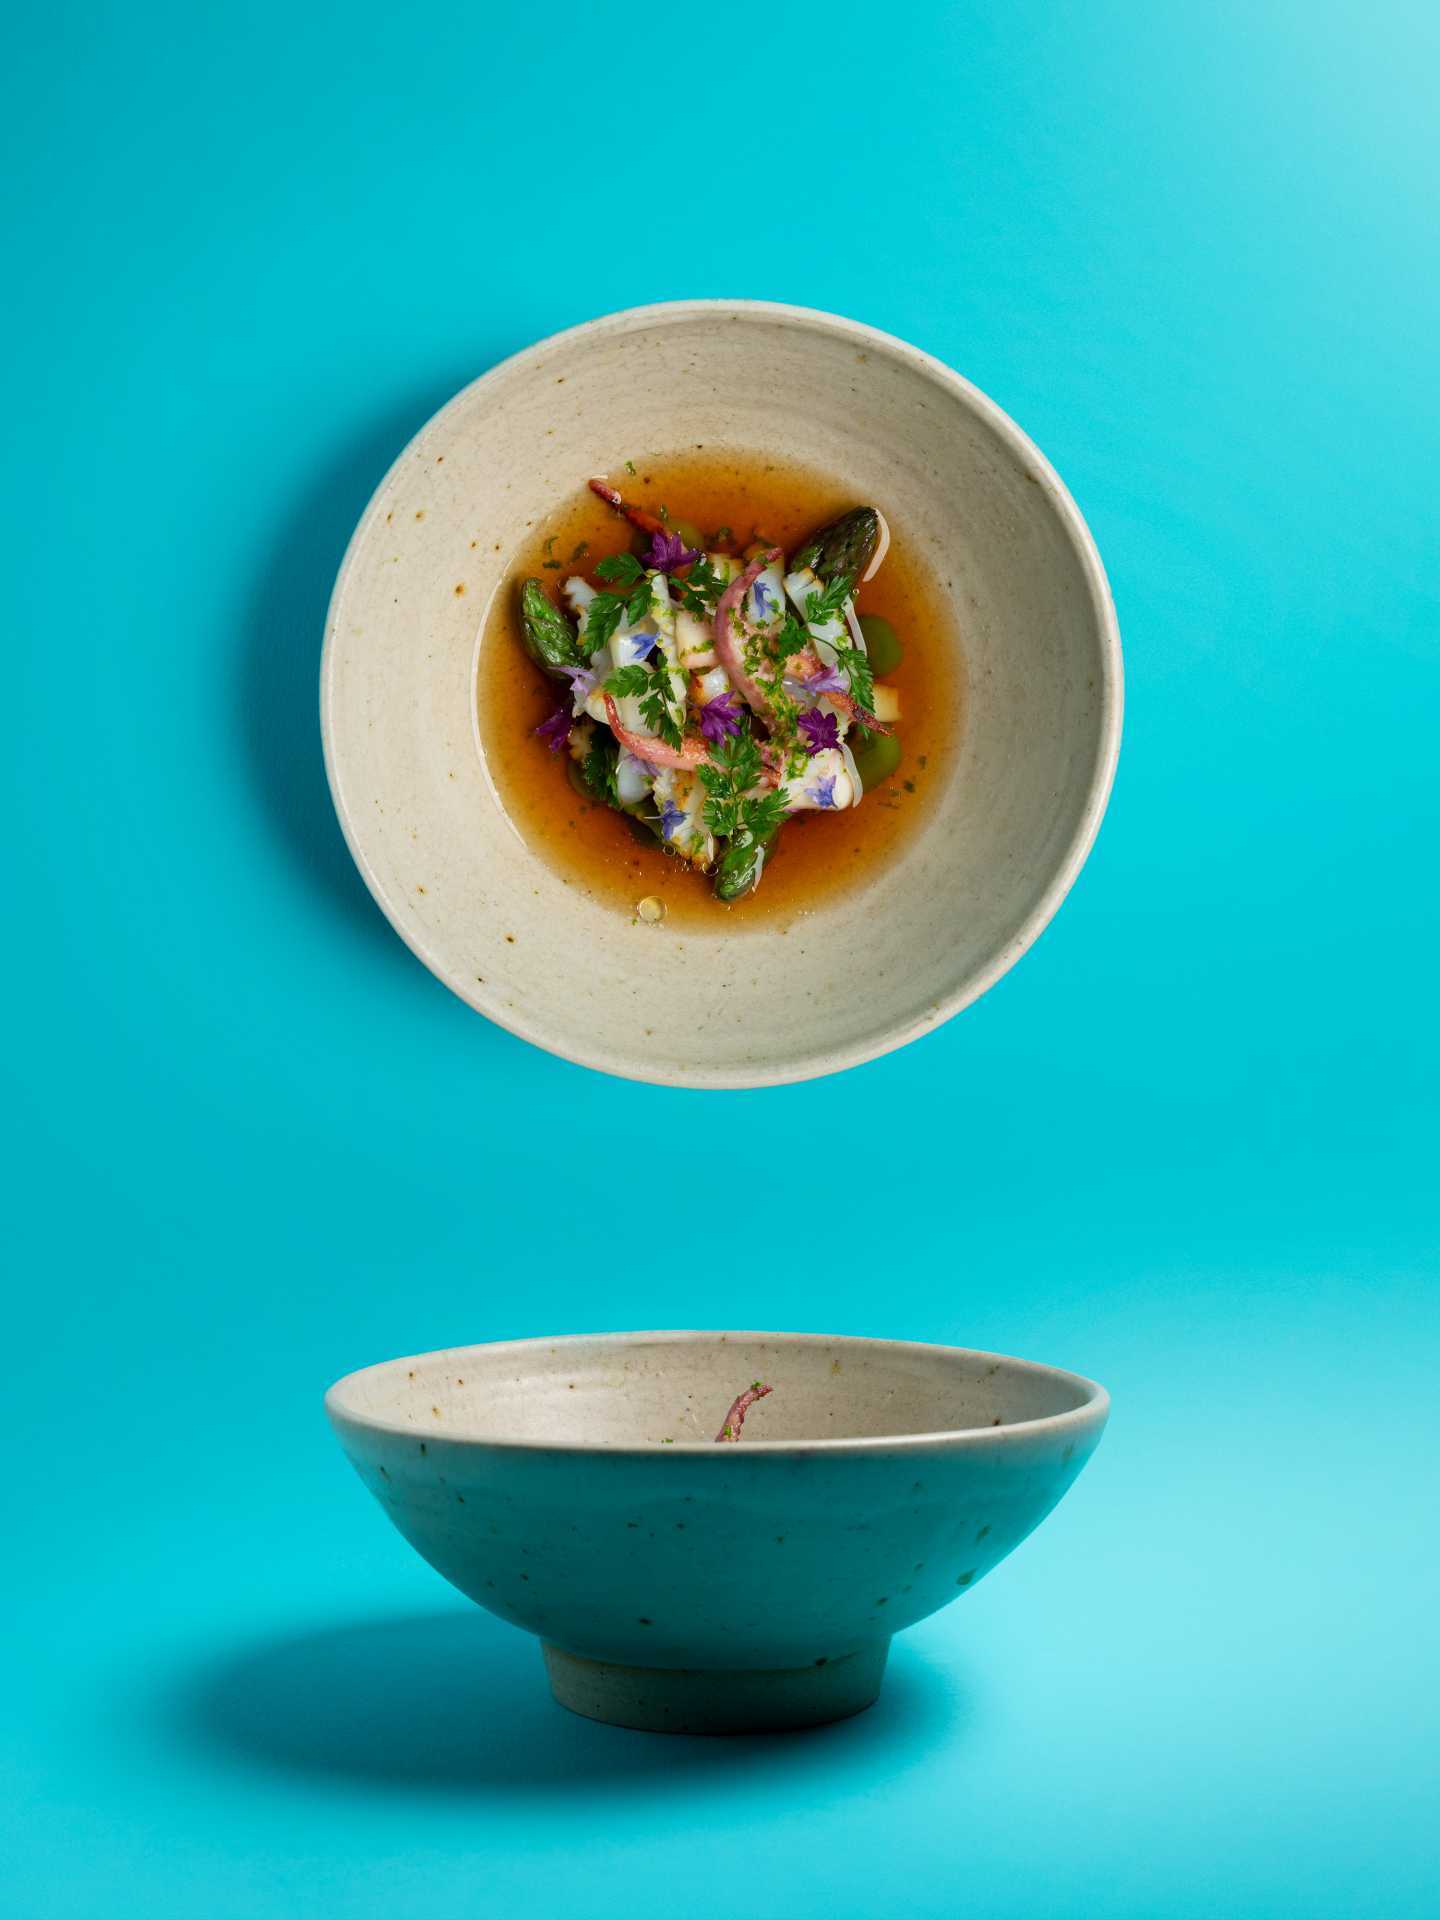 Dishes by Luke, Nat & Theo Selby of Evelyn's Table